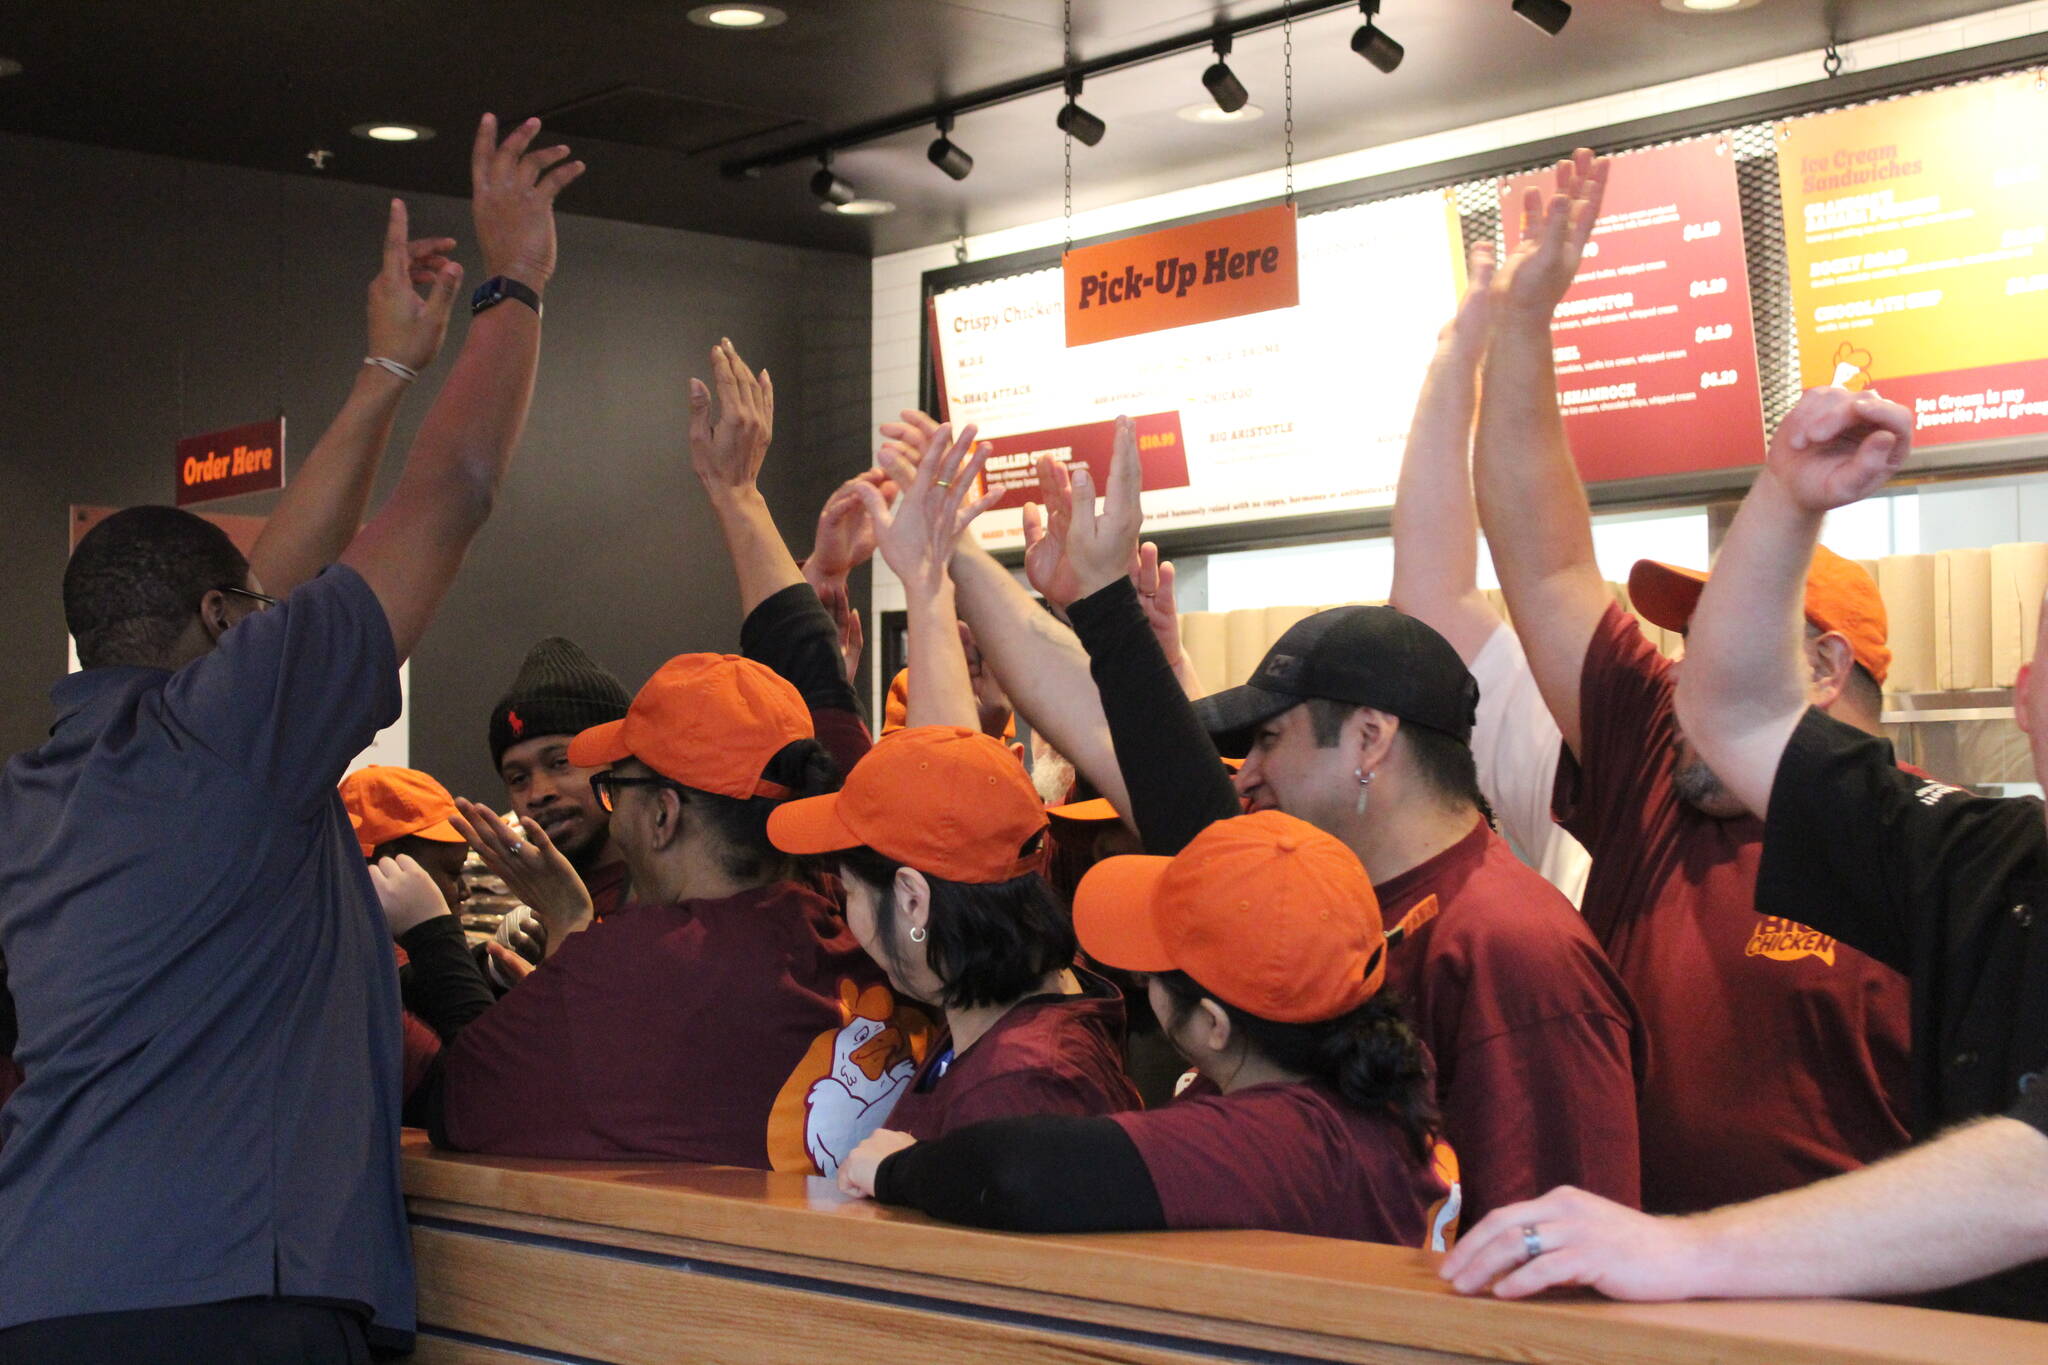 Photo by Bailey Jo Josie/Sound Publishing.
Minutes before Big Chicken’s grand opening, the crew brought all hands in.